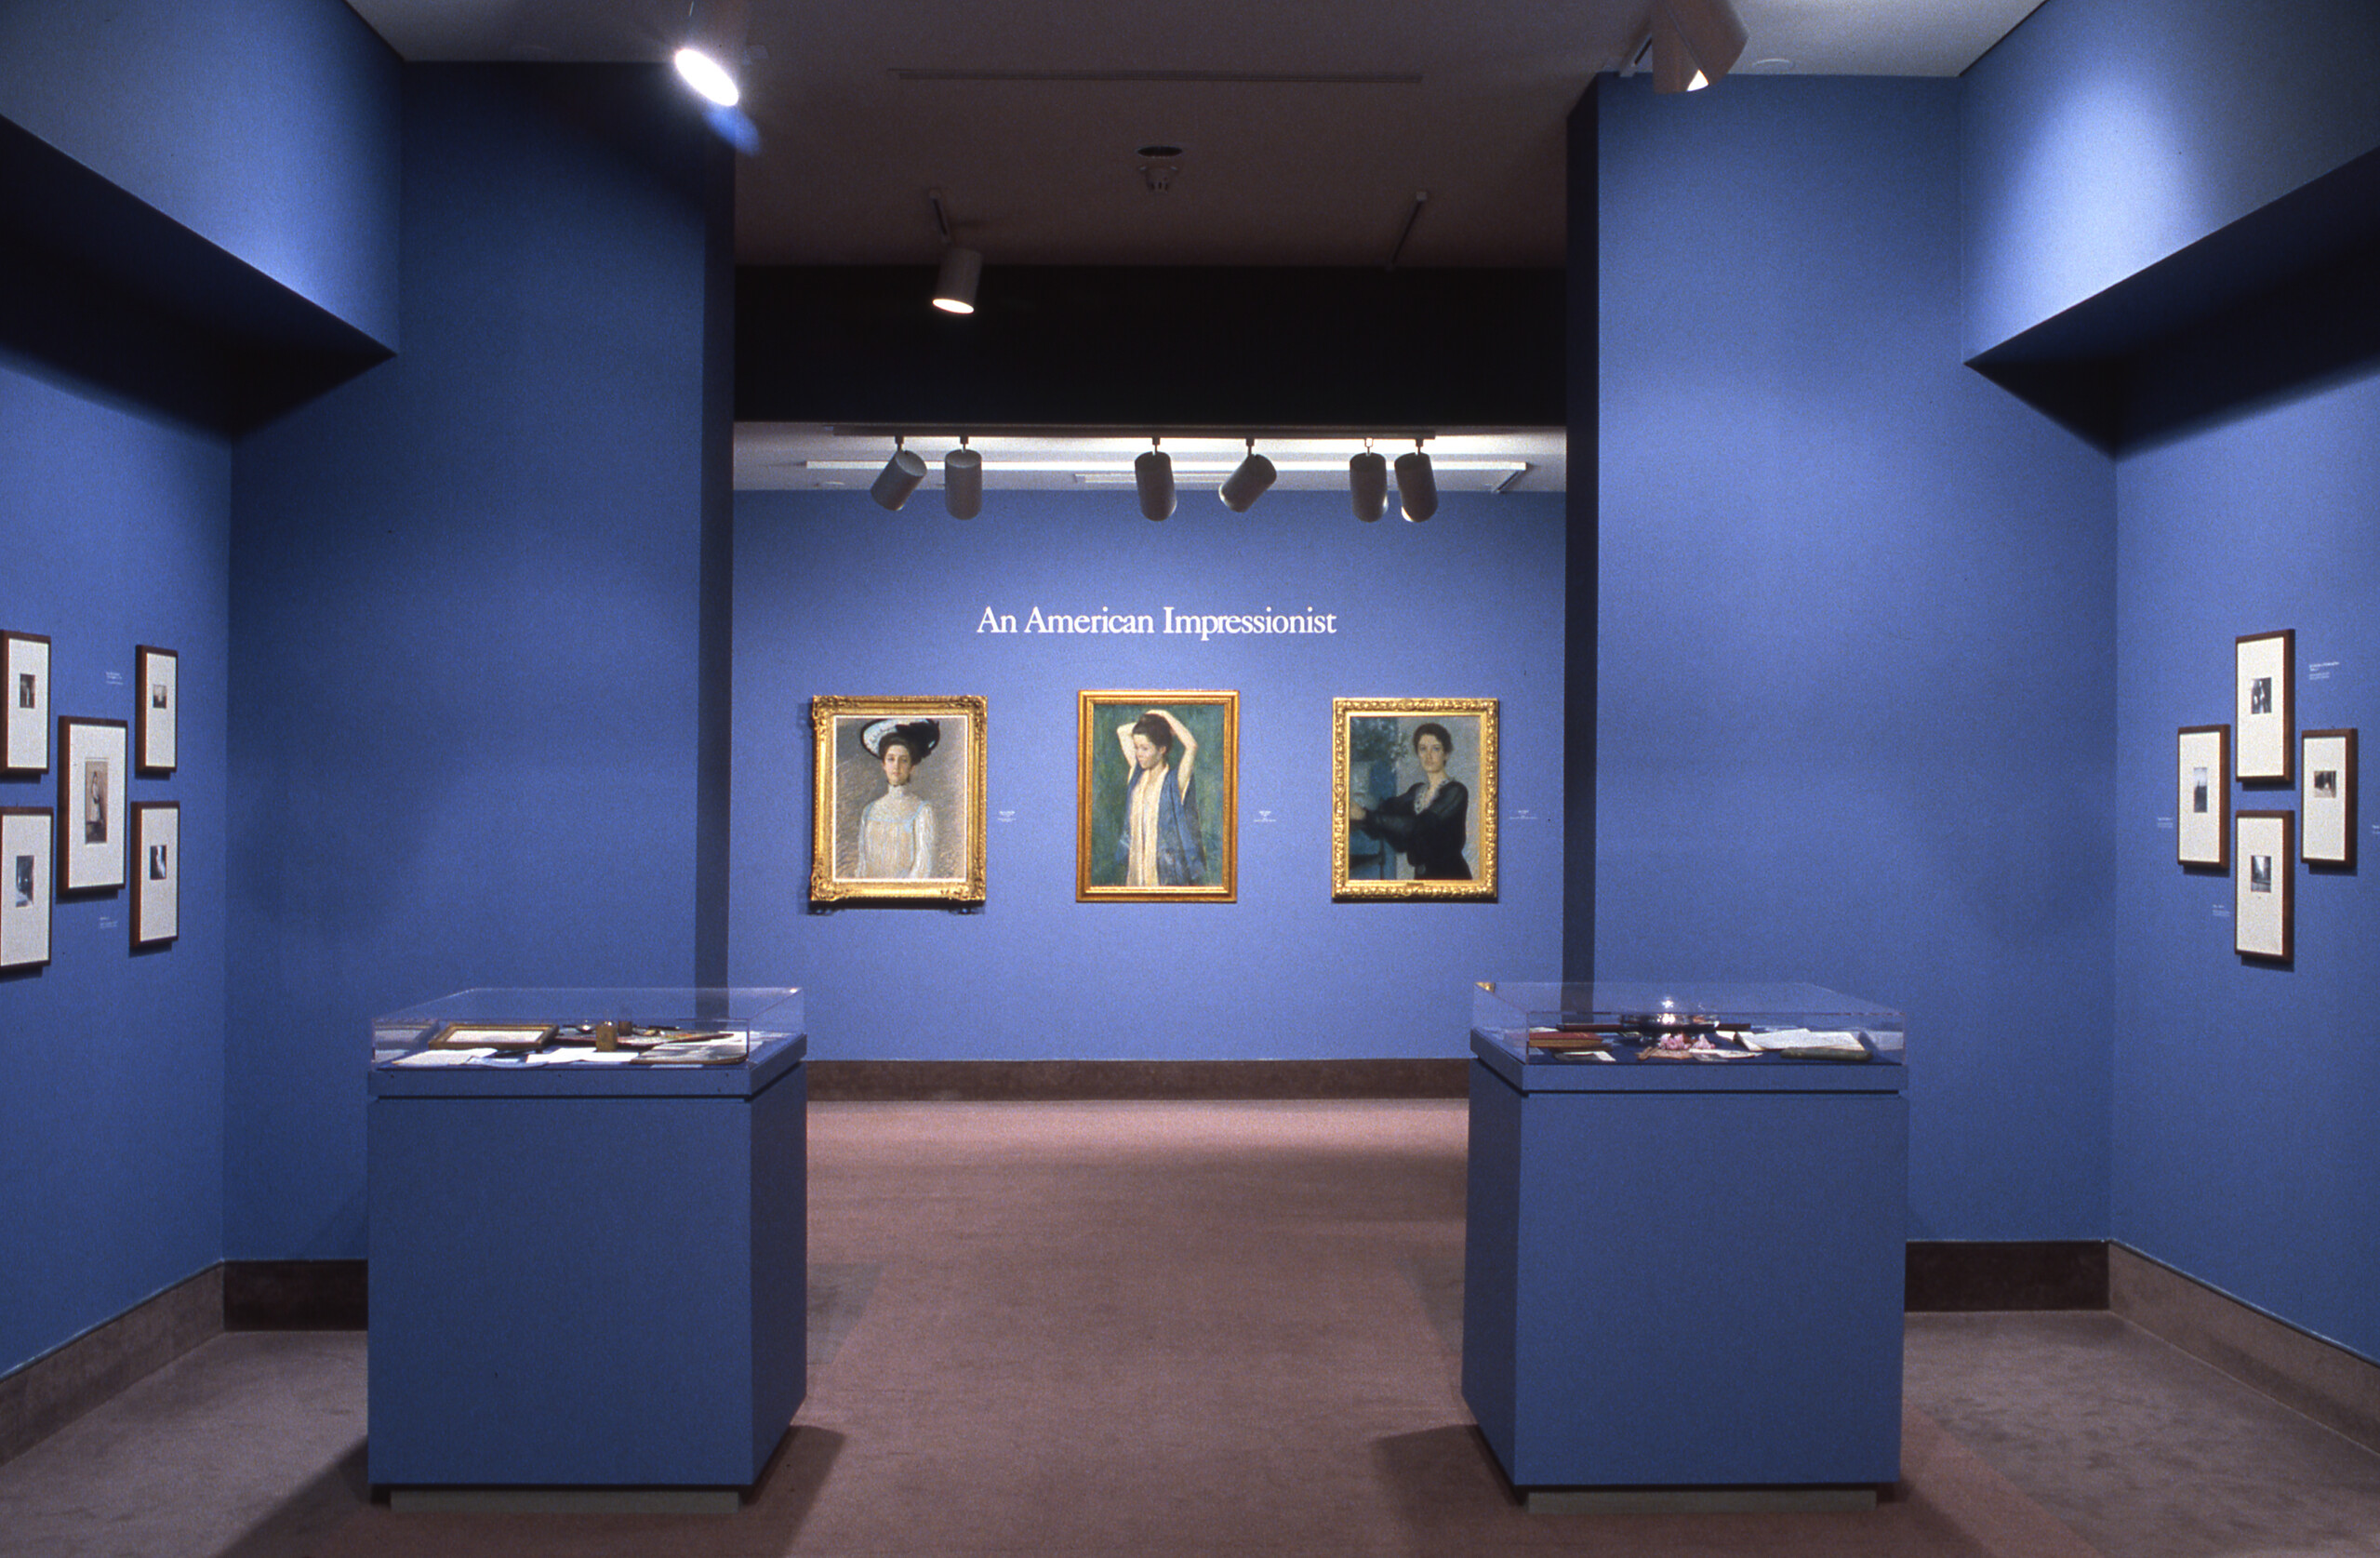 A view of a gallery shows several oil paintings hanging on blue walls. Three portraits of women in an Impressionist painting style hang next to each other. In large letters, it says 